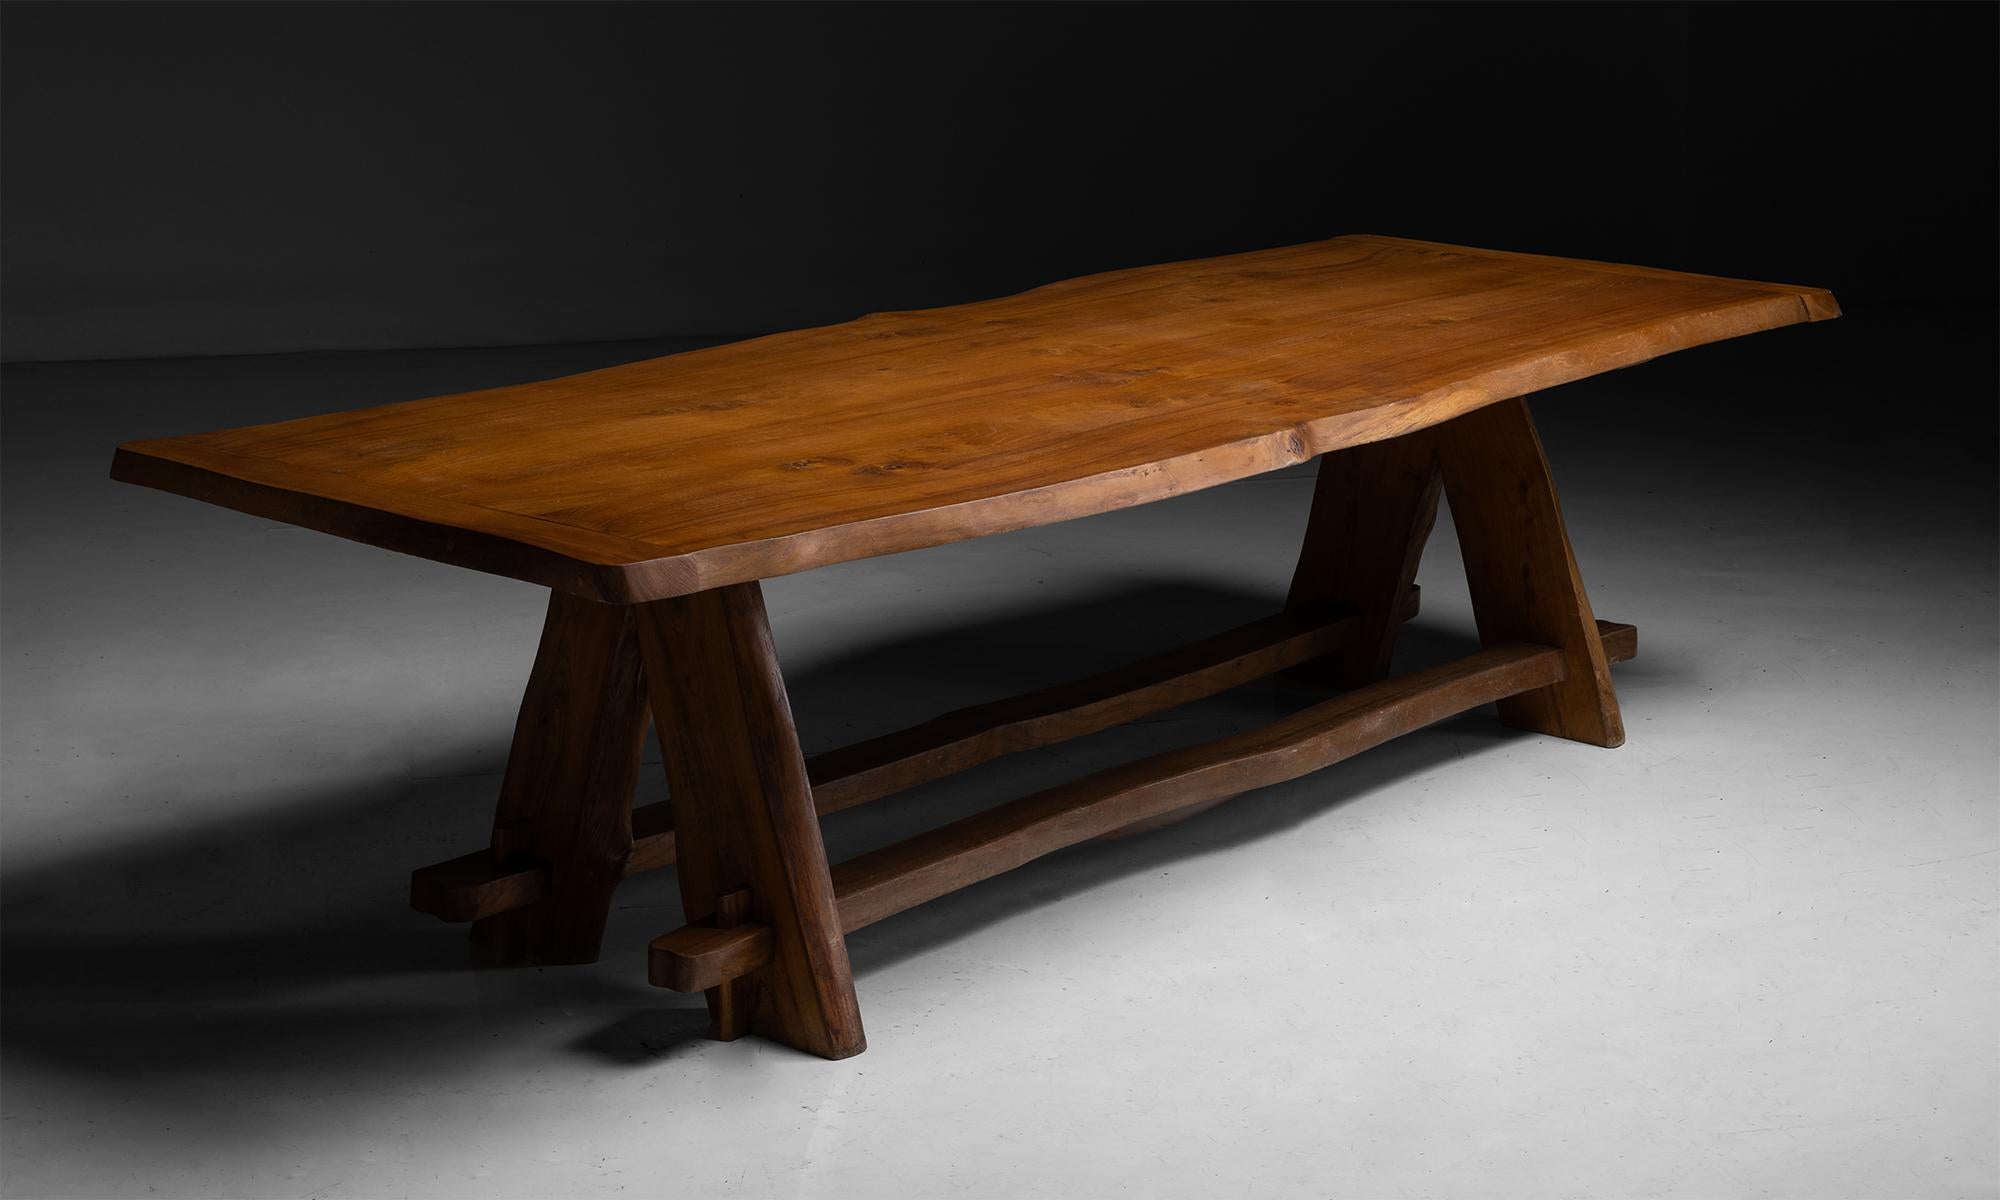 Elm Dining Table by Charles Flandre

France circa 1965

Live edge surface on splayed legs with two stretchers.

Measures 109.5”L x 39.5”d x 28.75”h